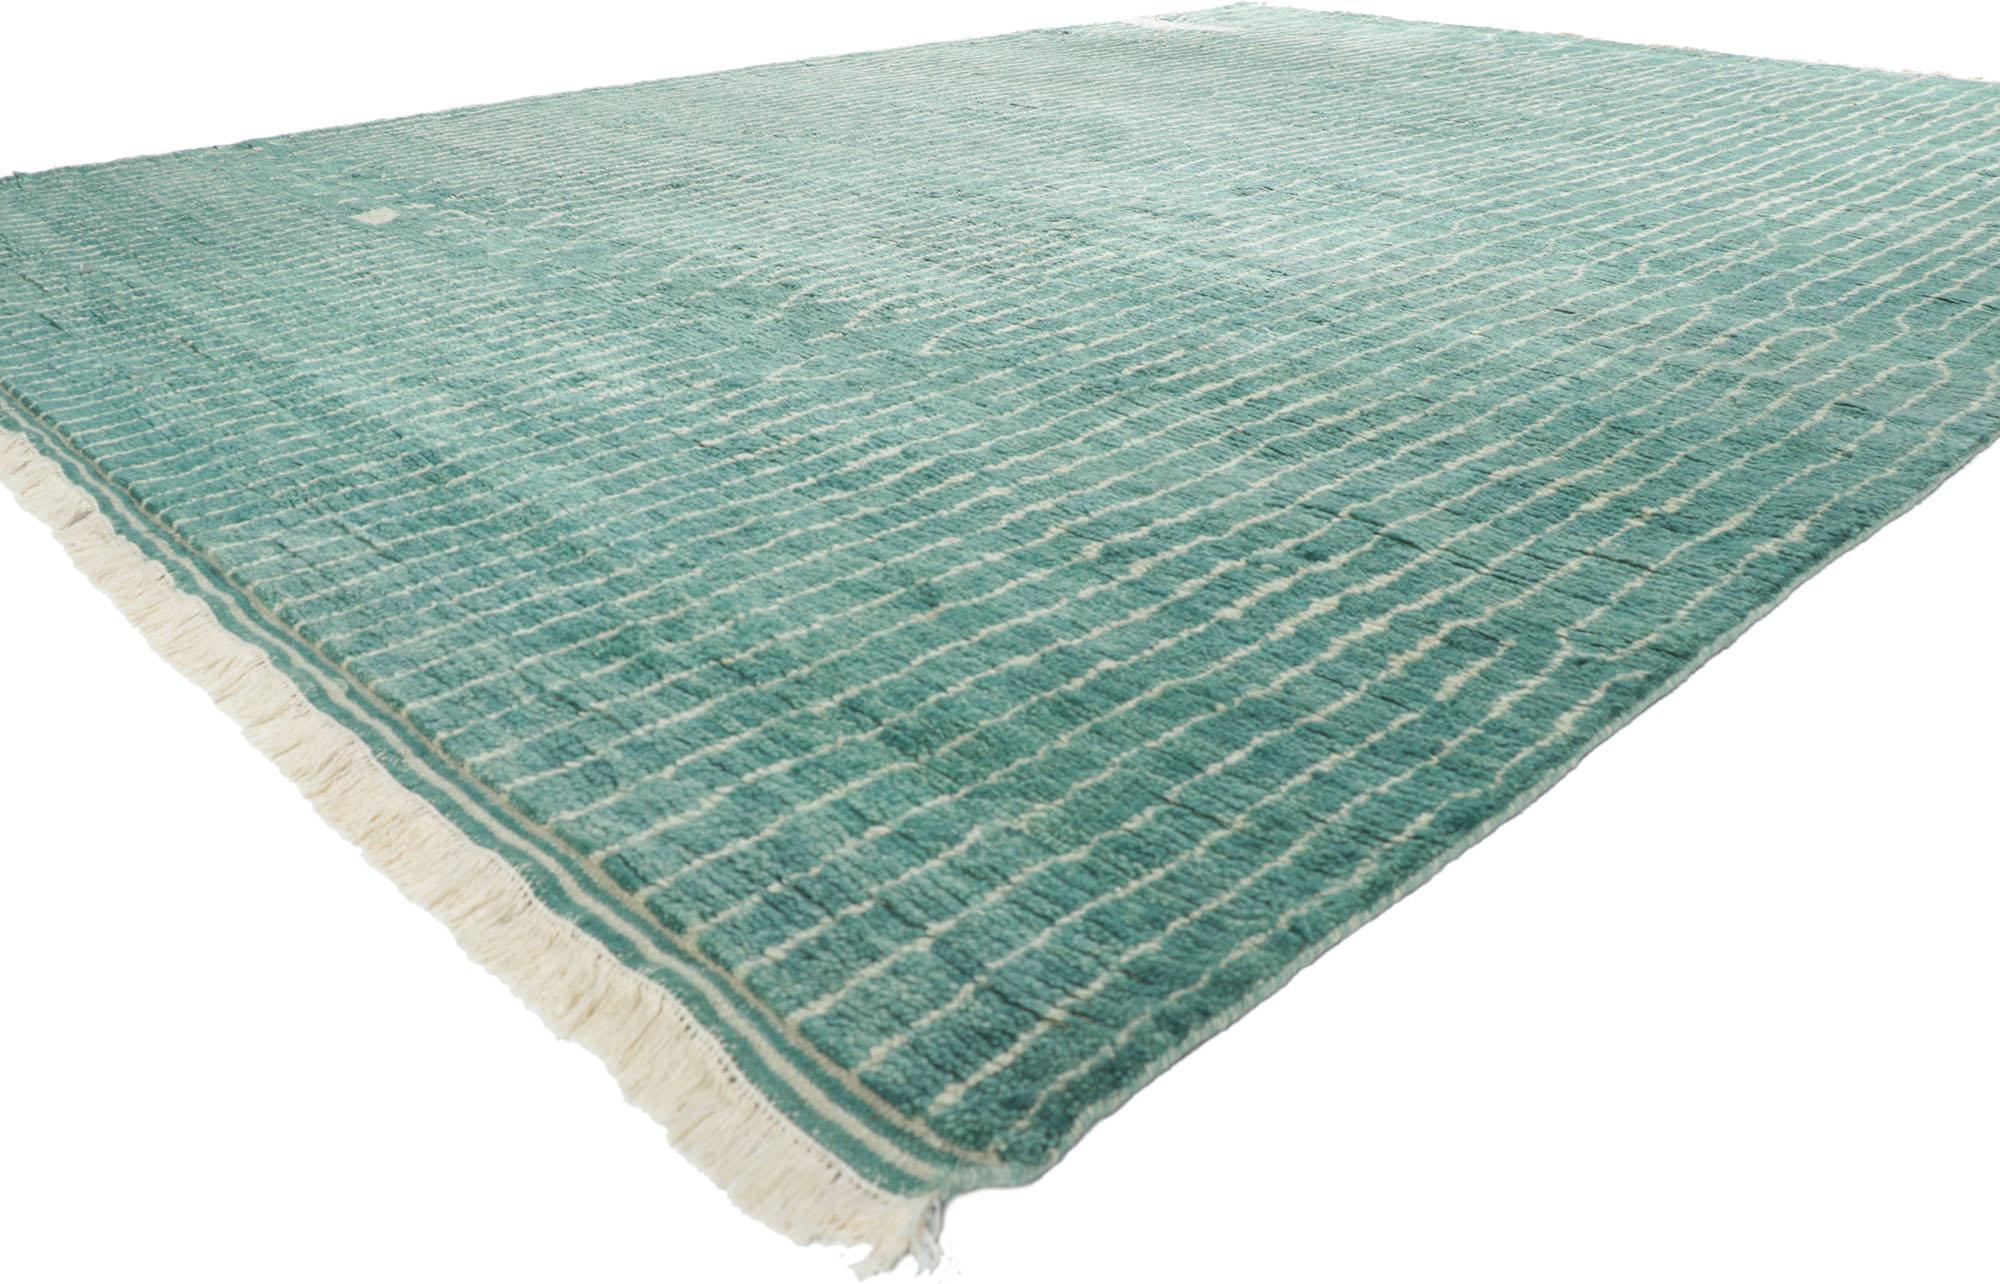 30770 New Contemporary Moroccan Style Rug 12'04 x 14'09. Channeling a coastal cottage with colors reminiscence of sea glass and weathered wood, this hand-knotted wool contemporary Moroccan style rug is a captivating vision of woven beauty. The